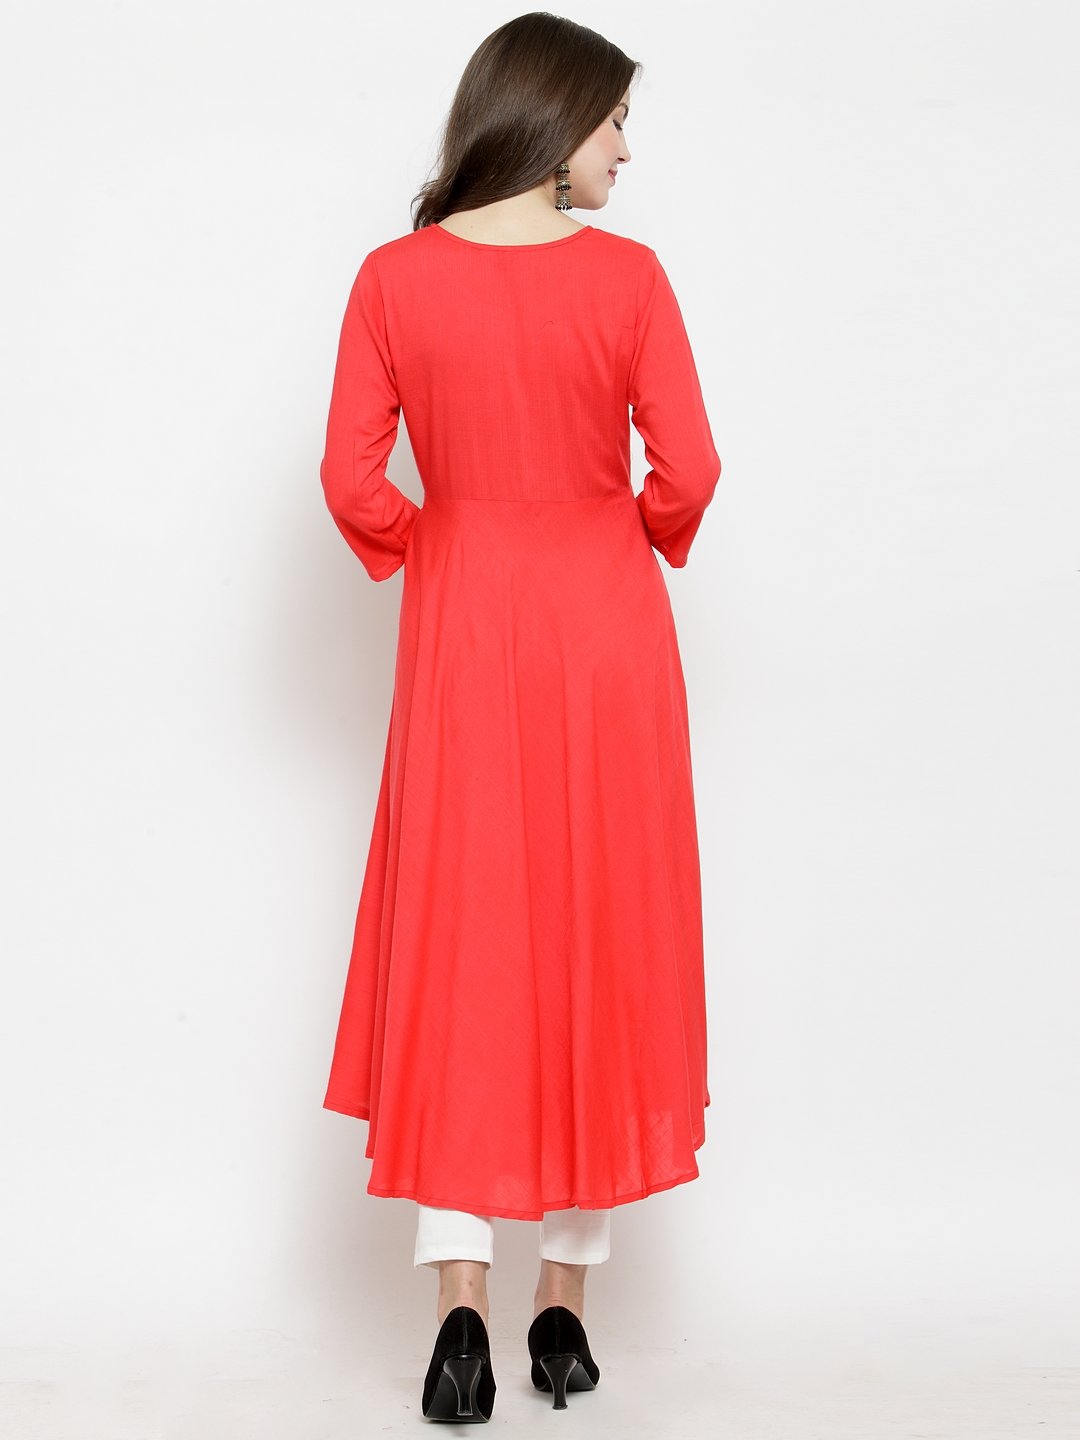 Women's Peach embroidered Flaired Kurta - Jompers